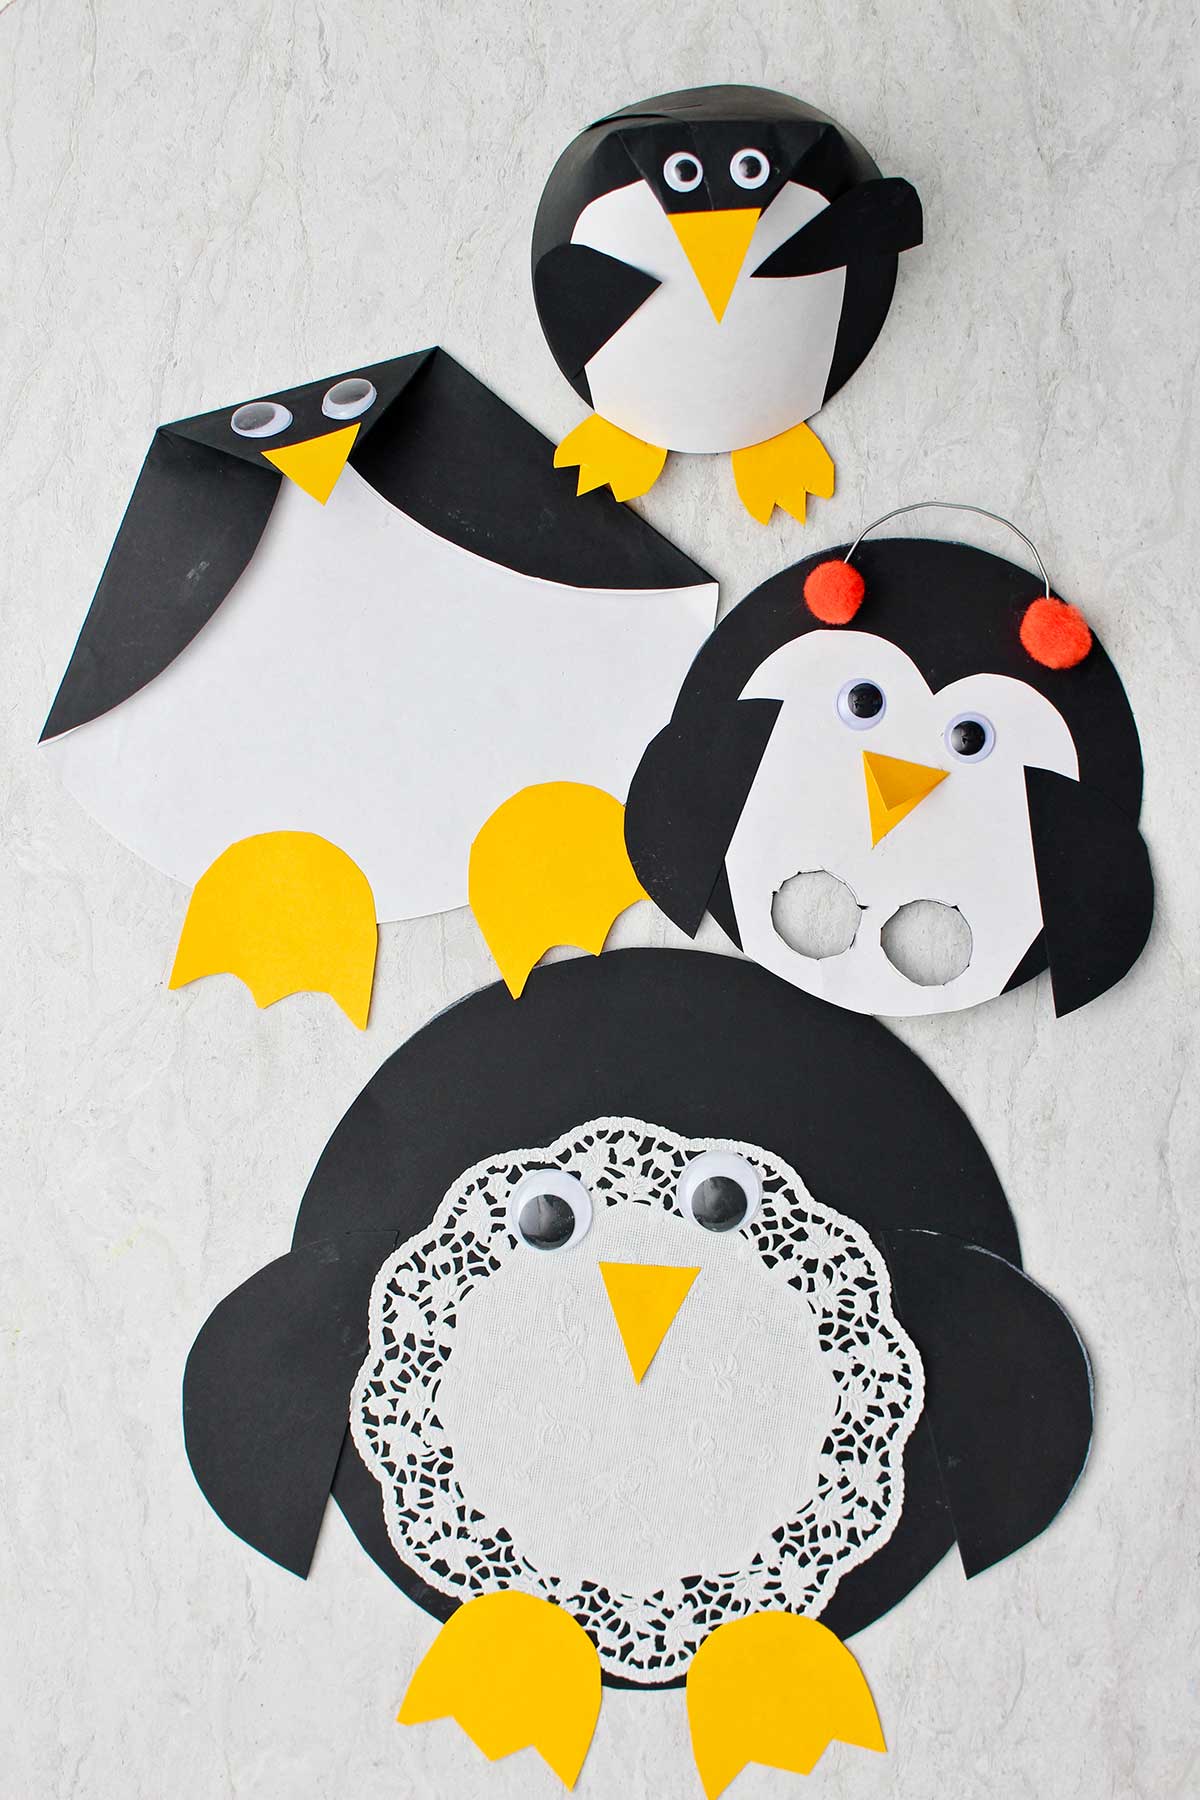 Four completed Paper Penguin Crafts.